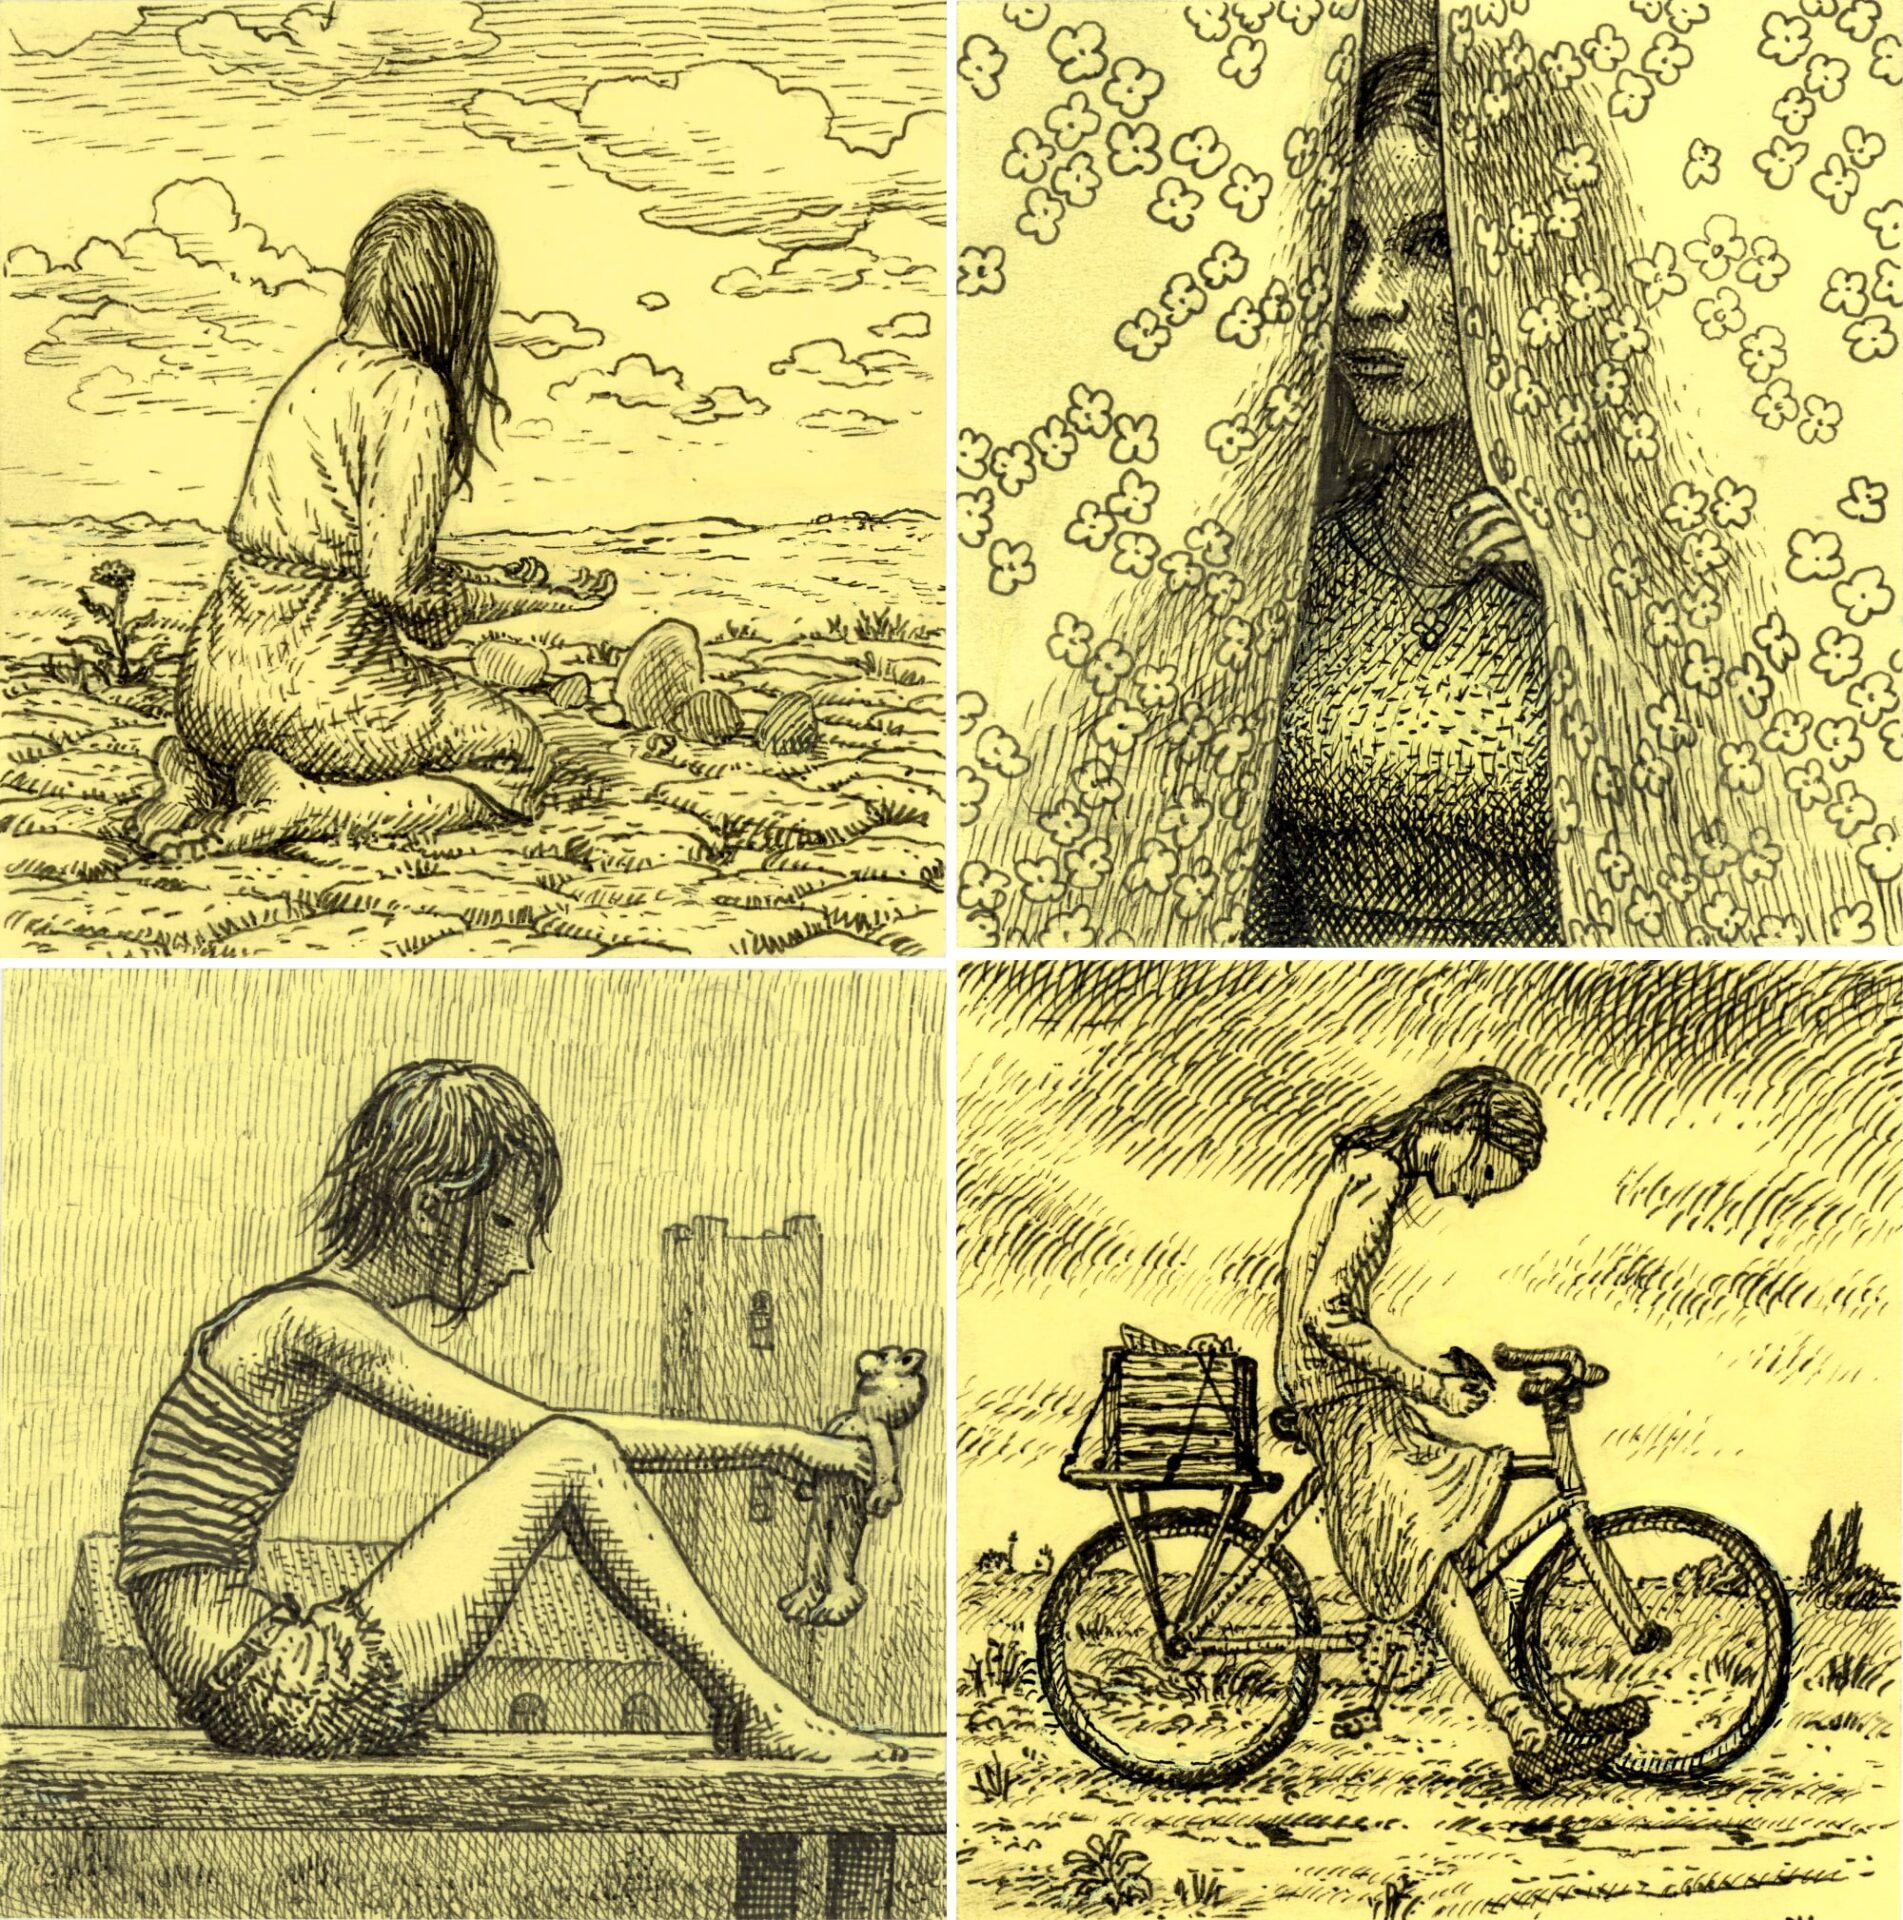 clockwise from top left: an ink drawing of a girl on her knees with in a field looking up at the clouds, an ink drawing of a girl peeking out through the middle of floral curtains, an ink drawing of a child in shorts and a tank top resting on a balcony holding a stuffed animal, an ink drawing of a girl stopped on a bike holding a bird